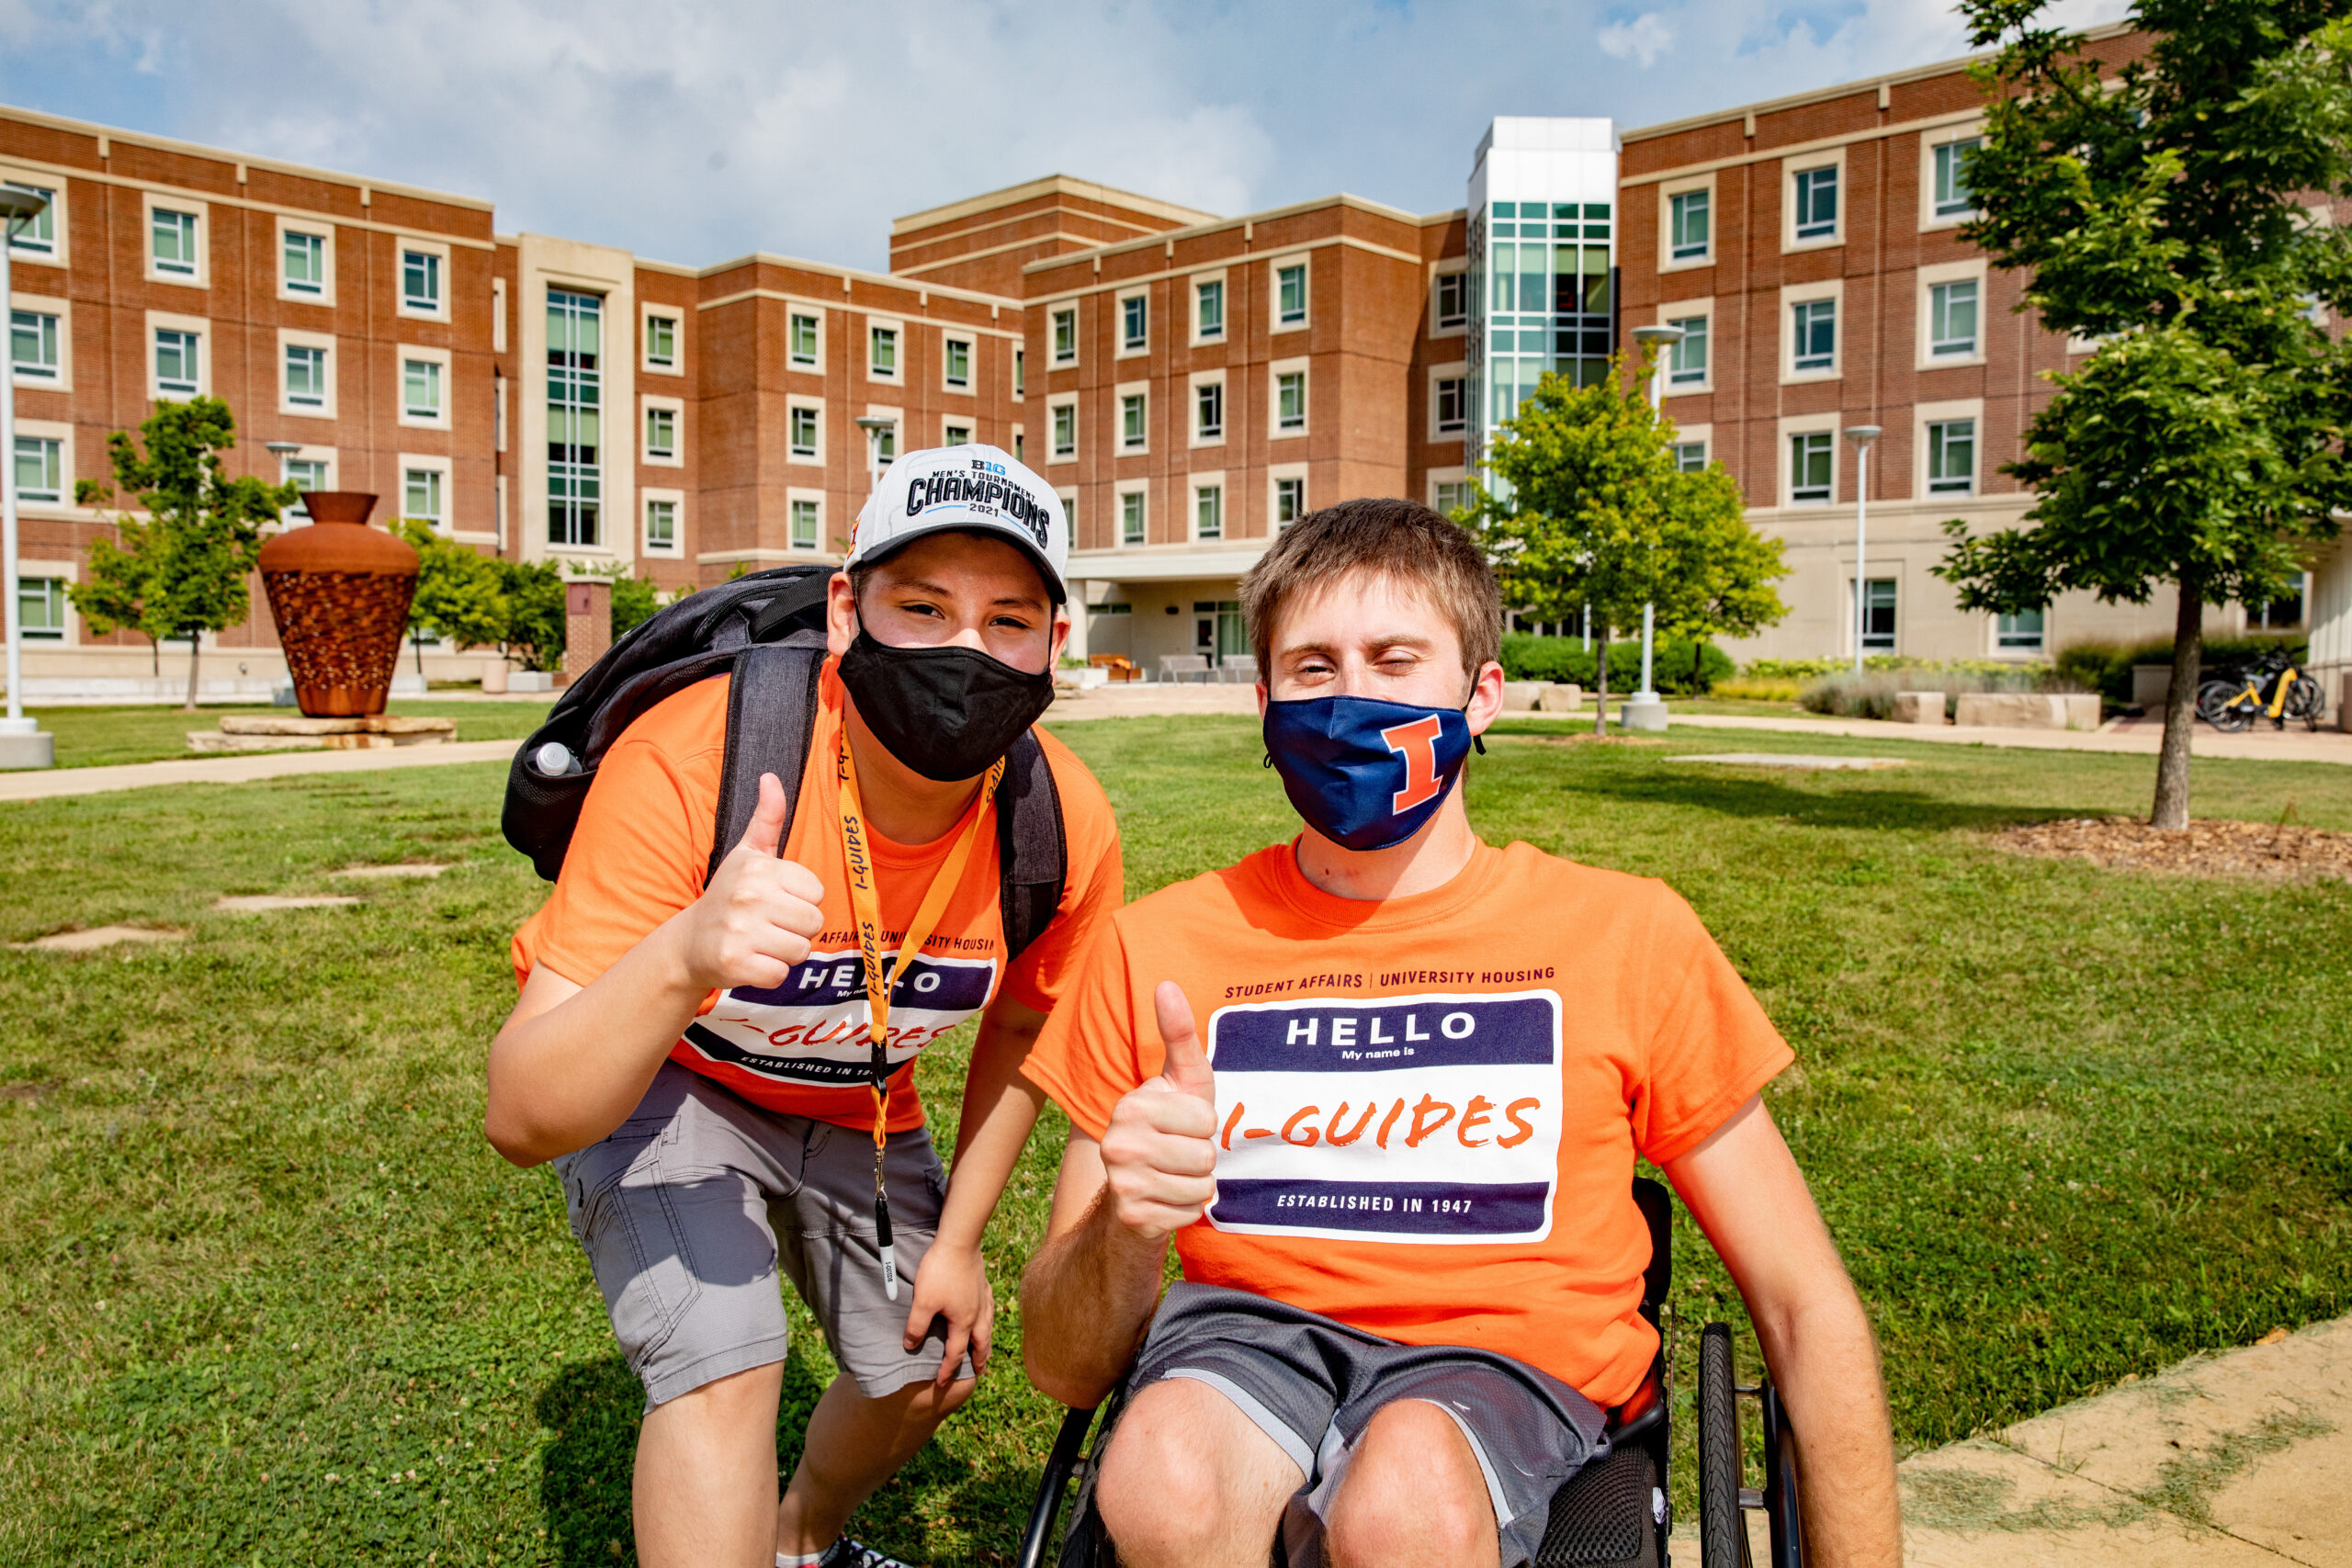 Two student I-guides, one in a wheelchair, posing for a photo in front of residence halls.